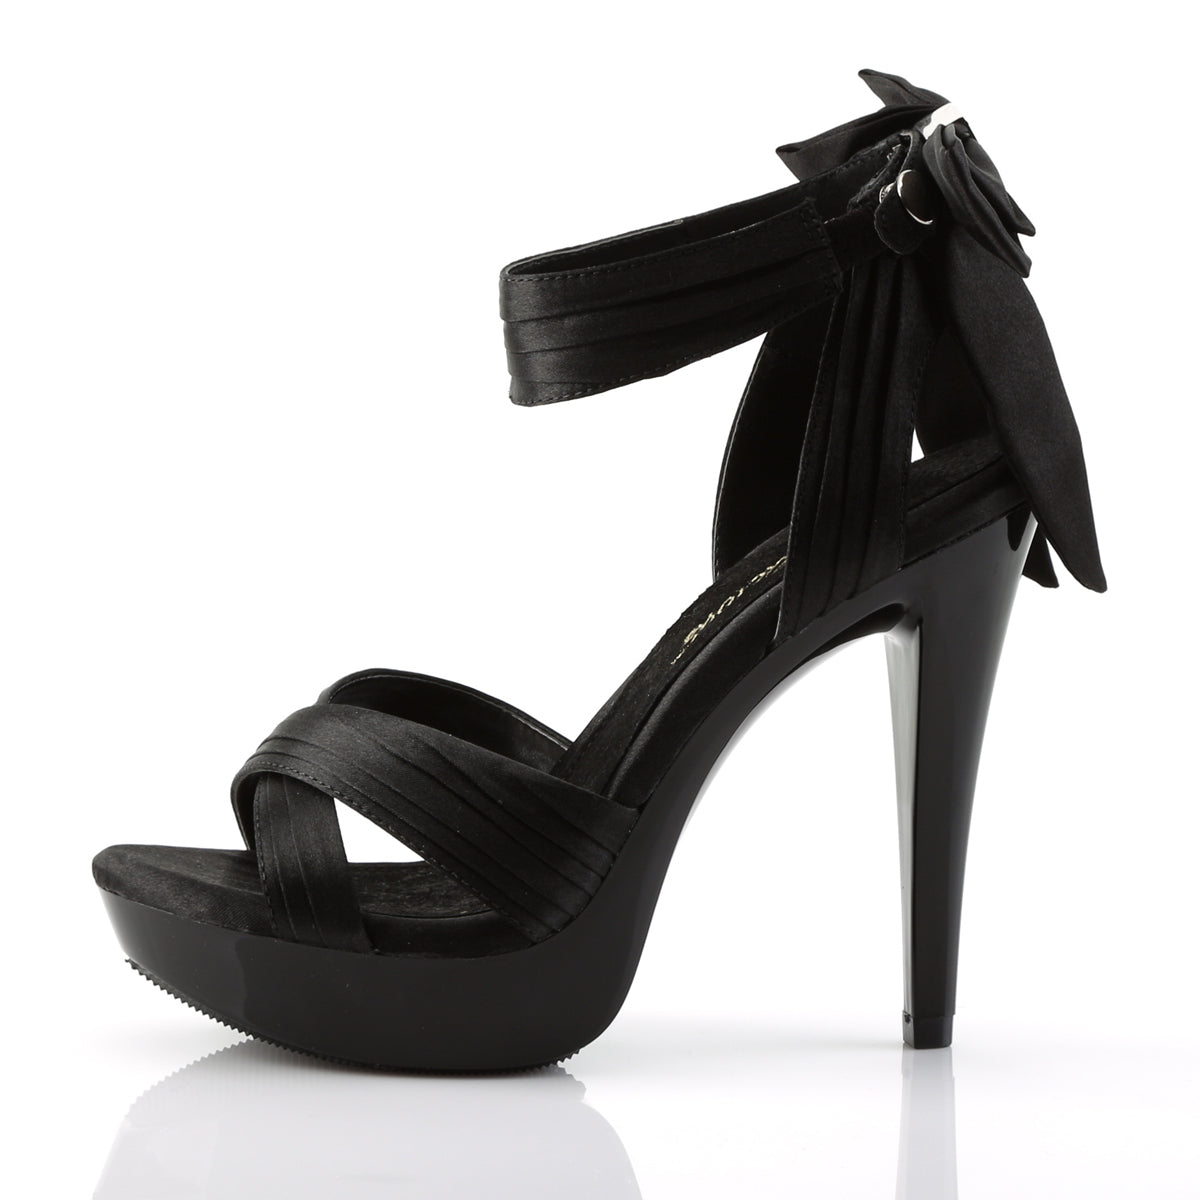 COCKTAIL-568 Fabulicious Black Satin/Black Shoes [Sexy Shoes]